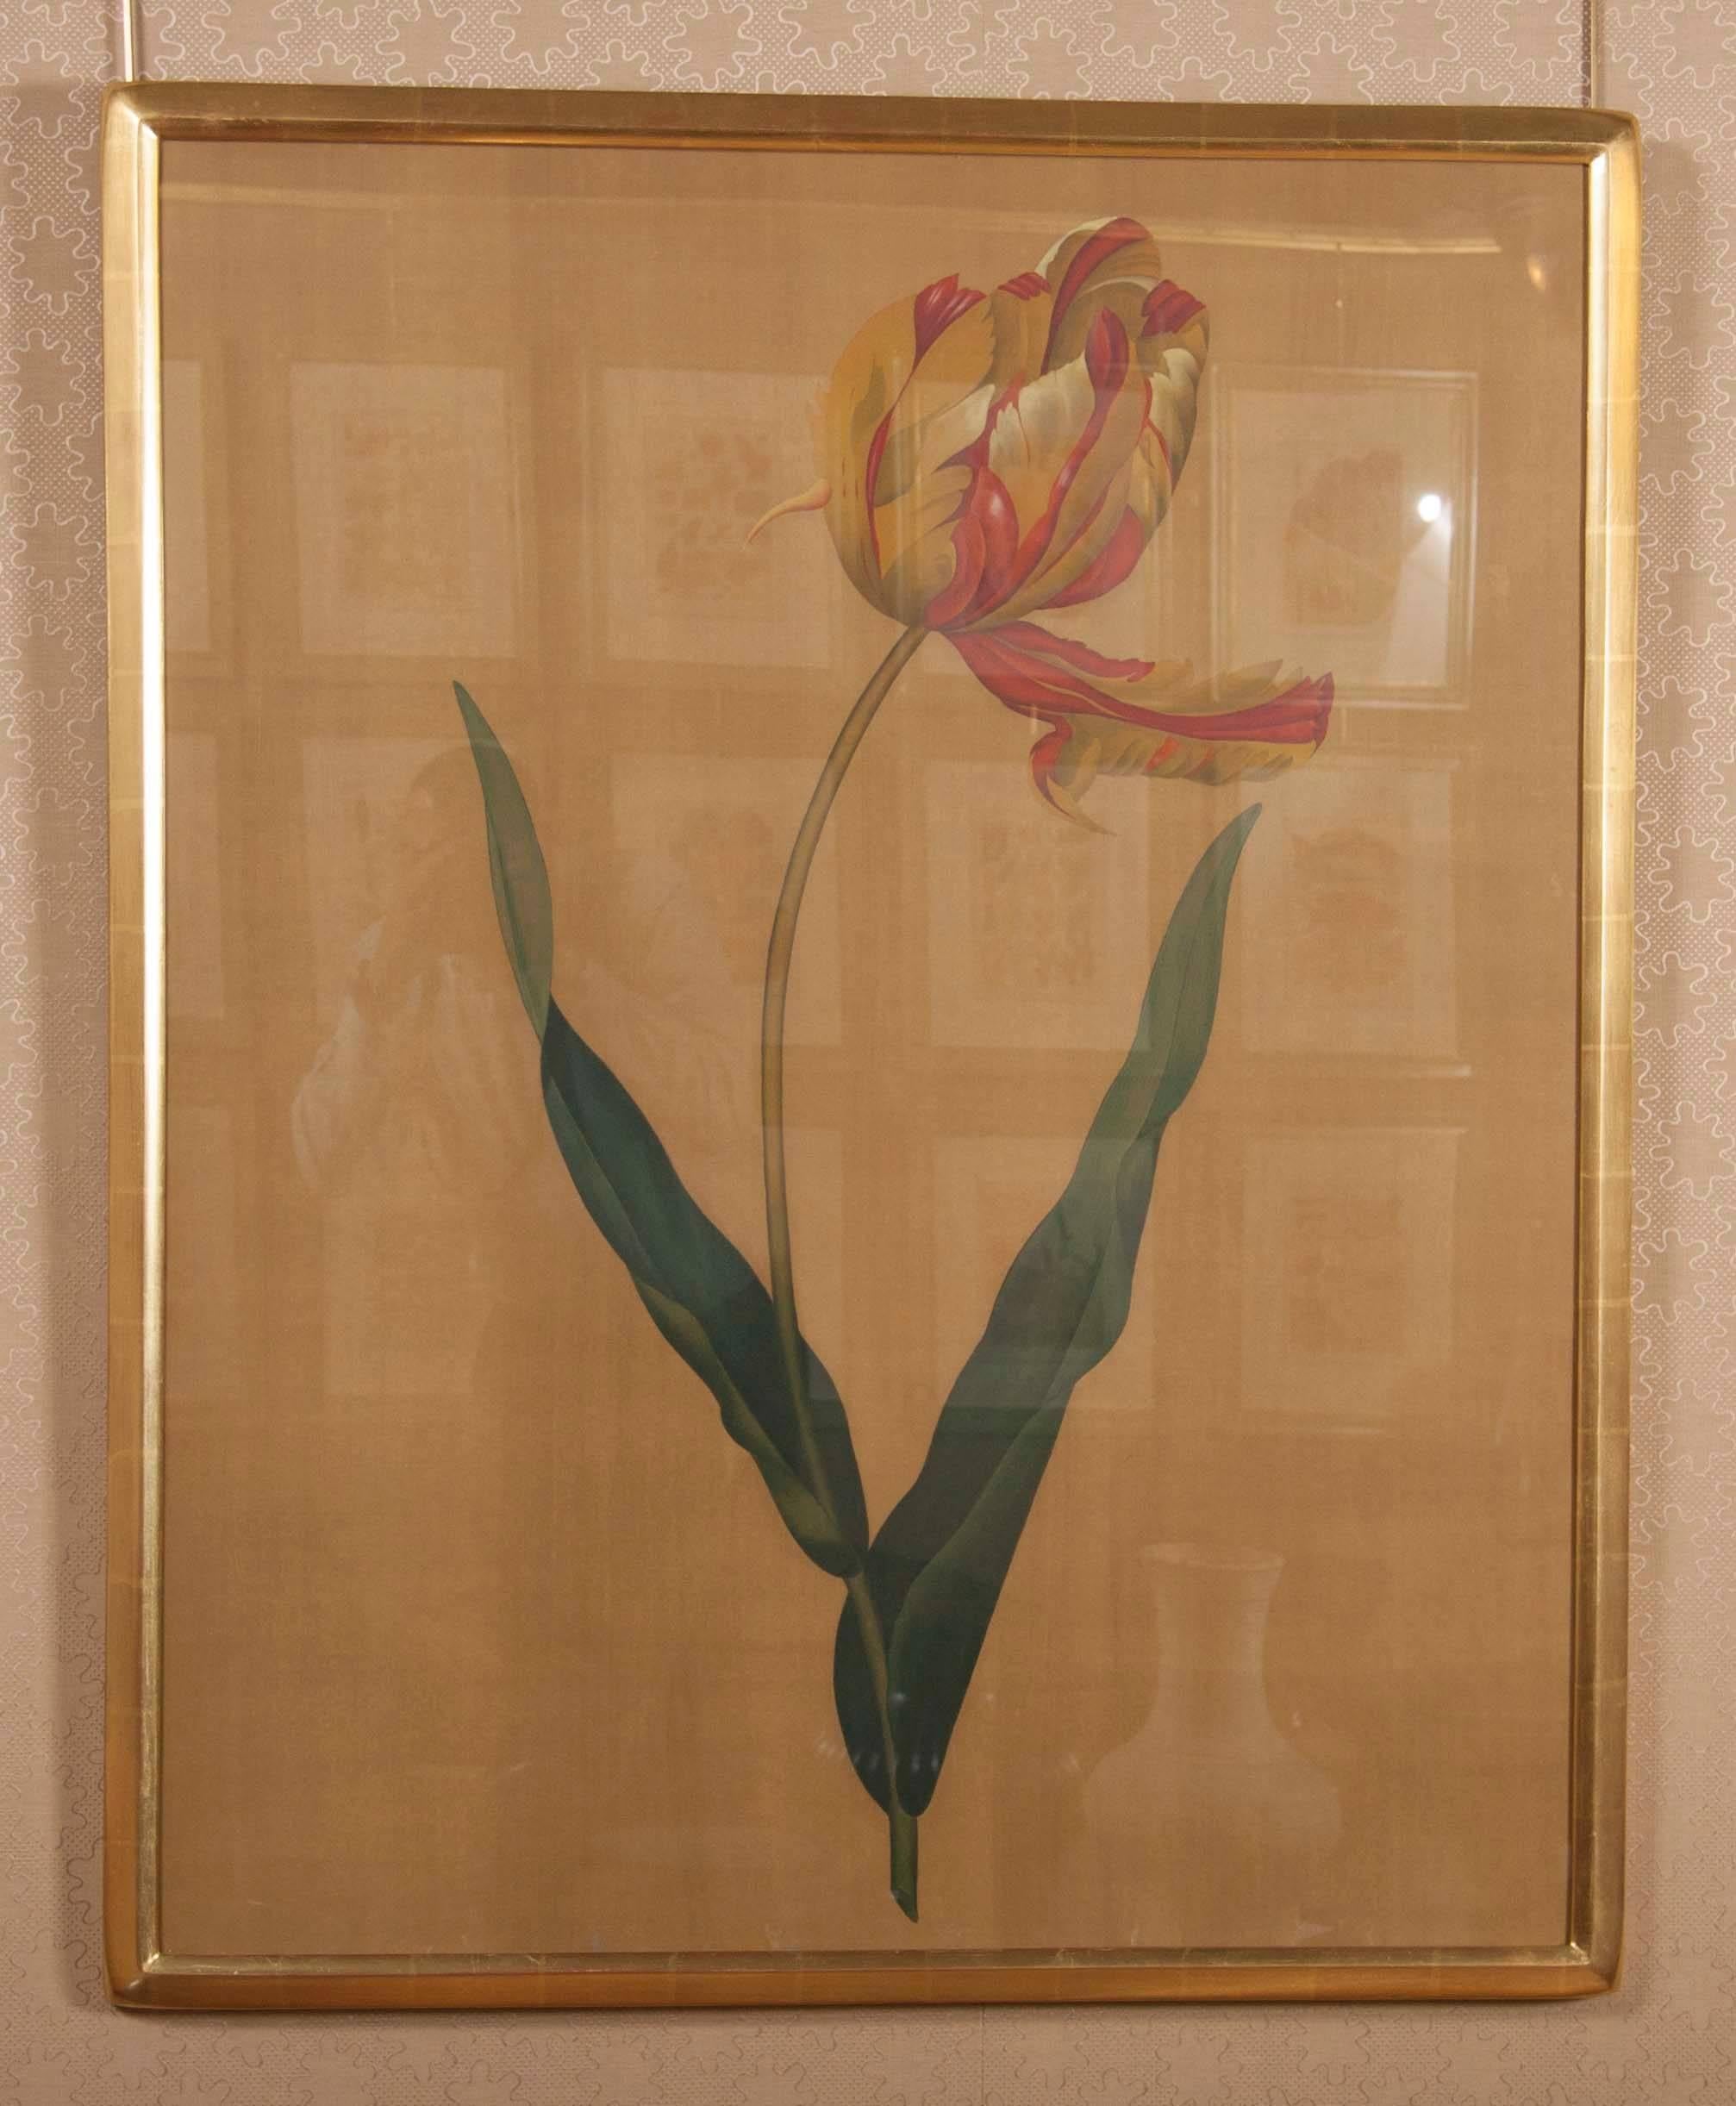 A pair of framed 19th century gouaches of tulips on silk, in the style of Castiglione (Lang Shining).